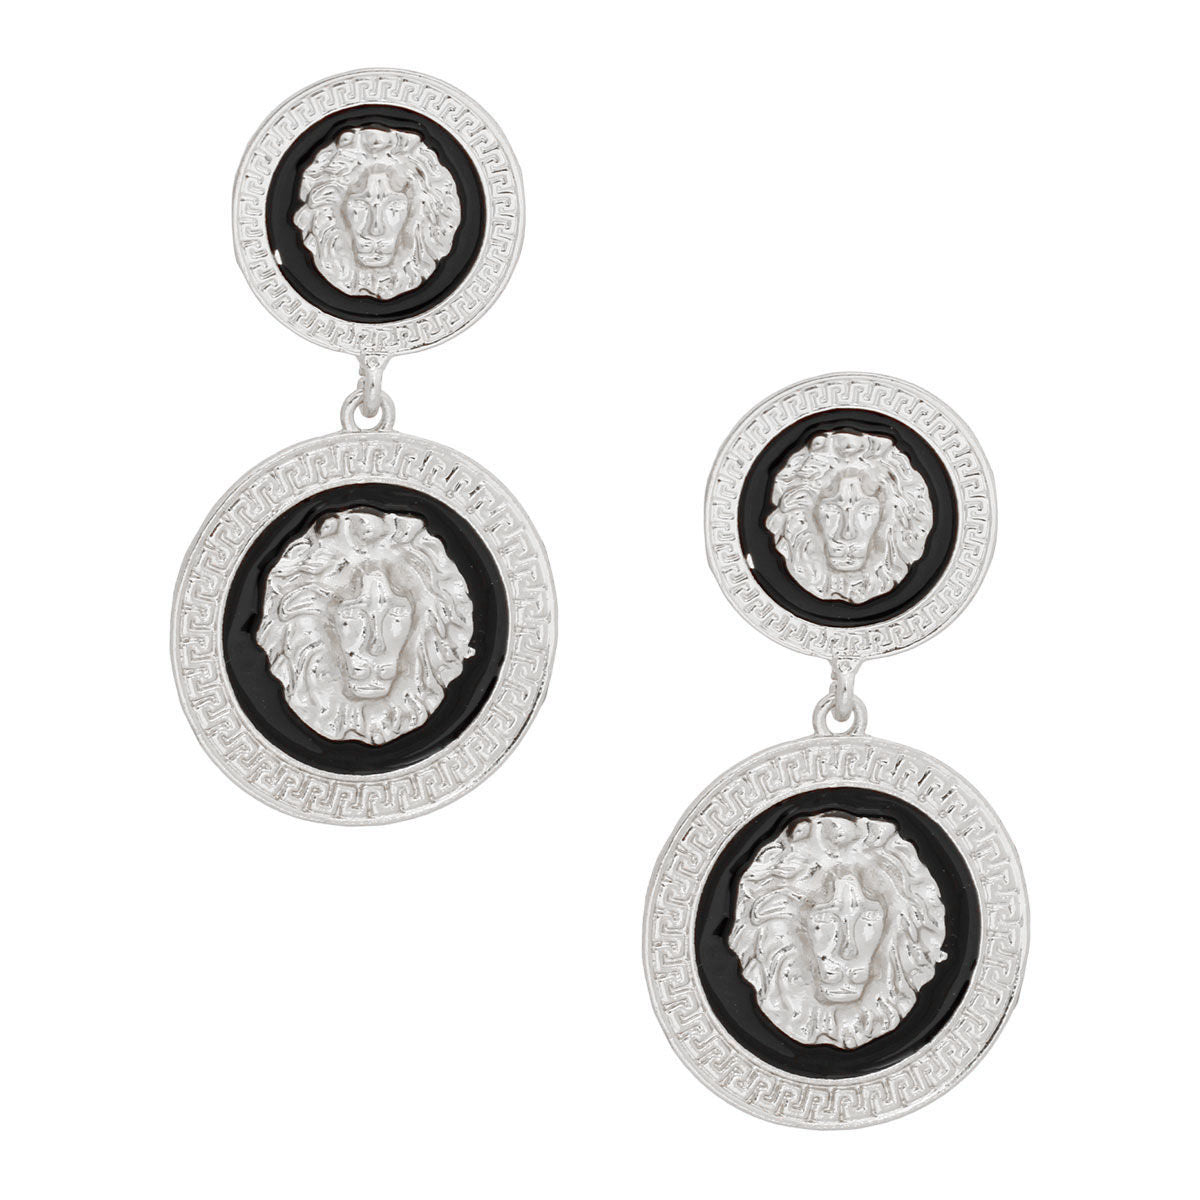 Silver and Black Double Lion Earrings